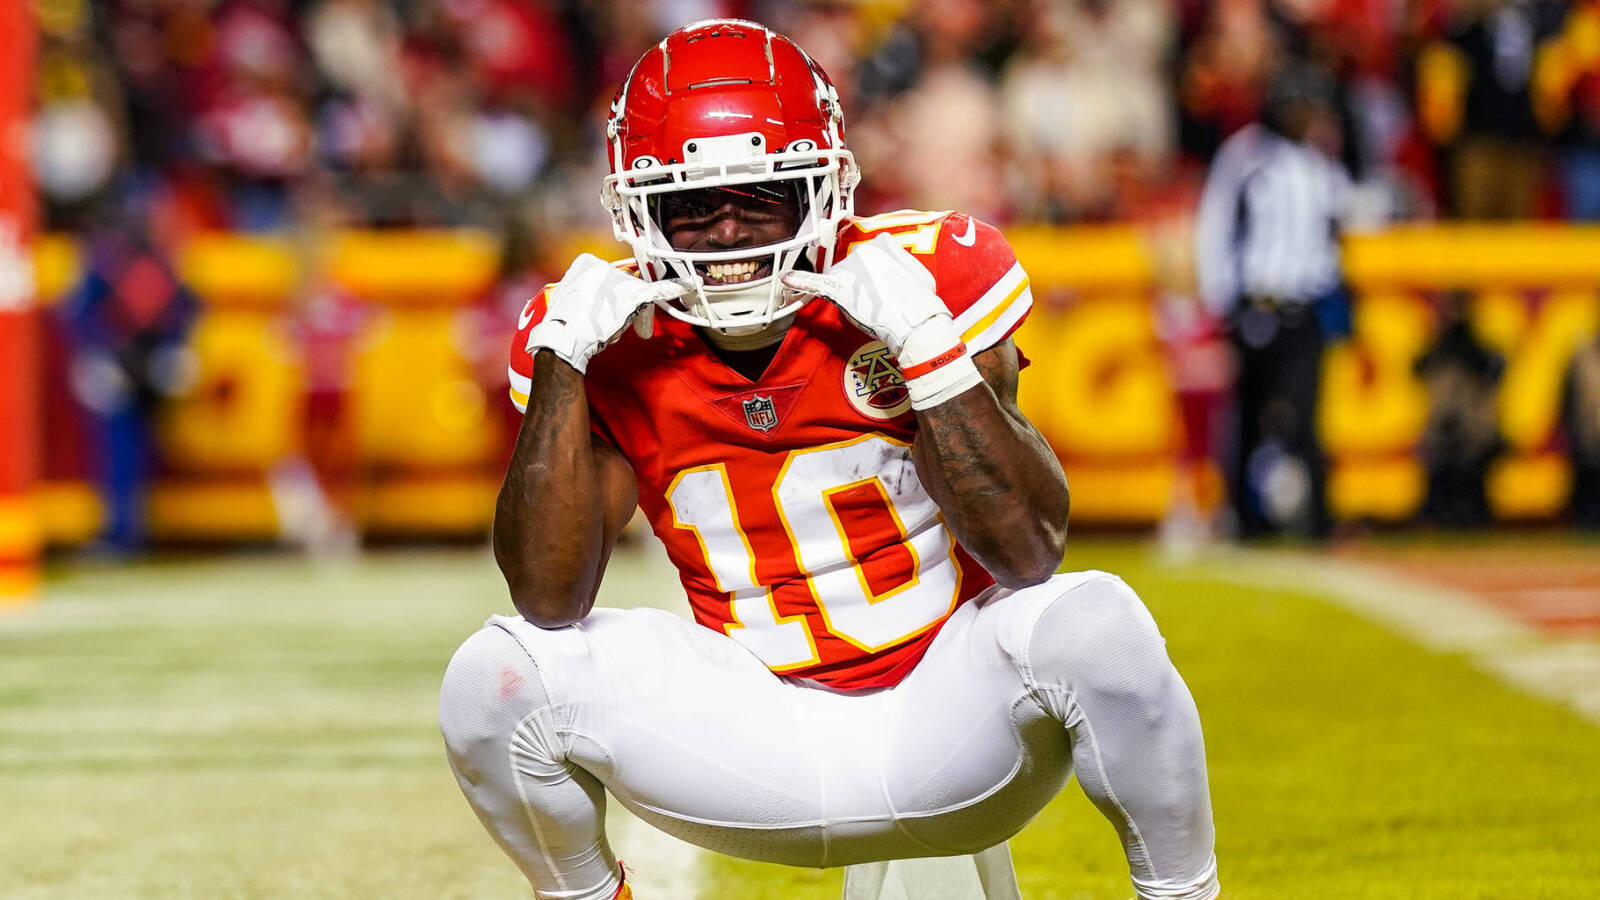  From Chiefs to Dolphins: How Tyreek Hill Faced His Old Team's Super Bowl Wins